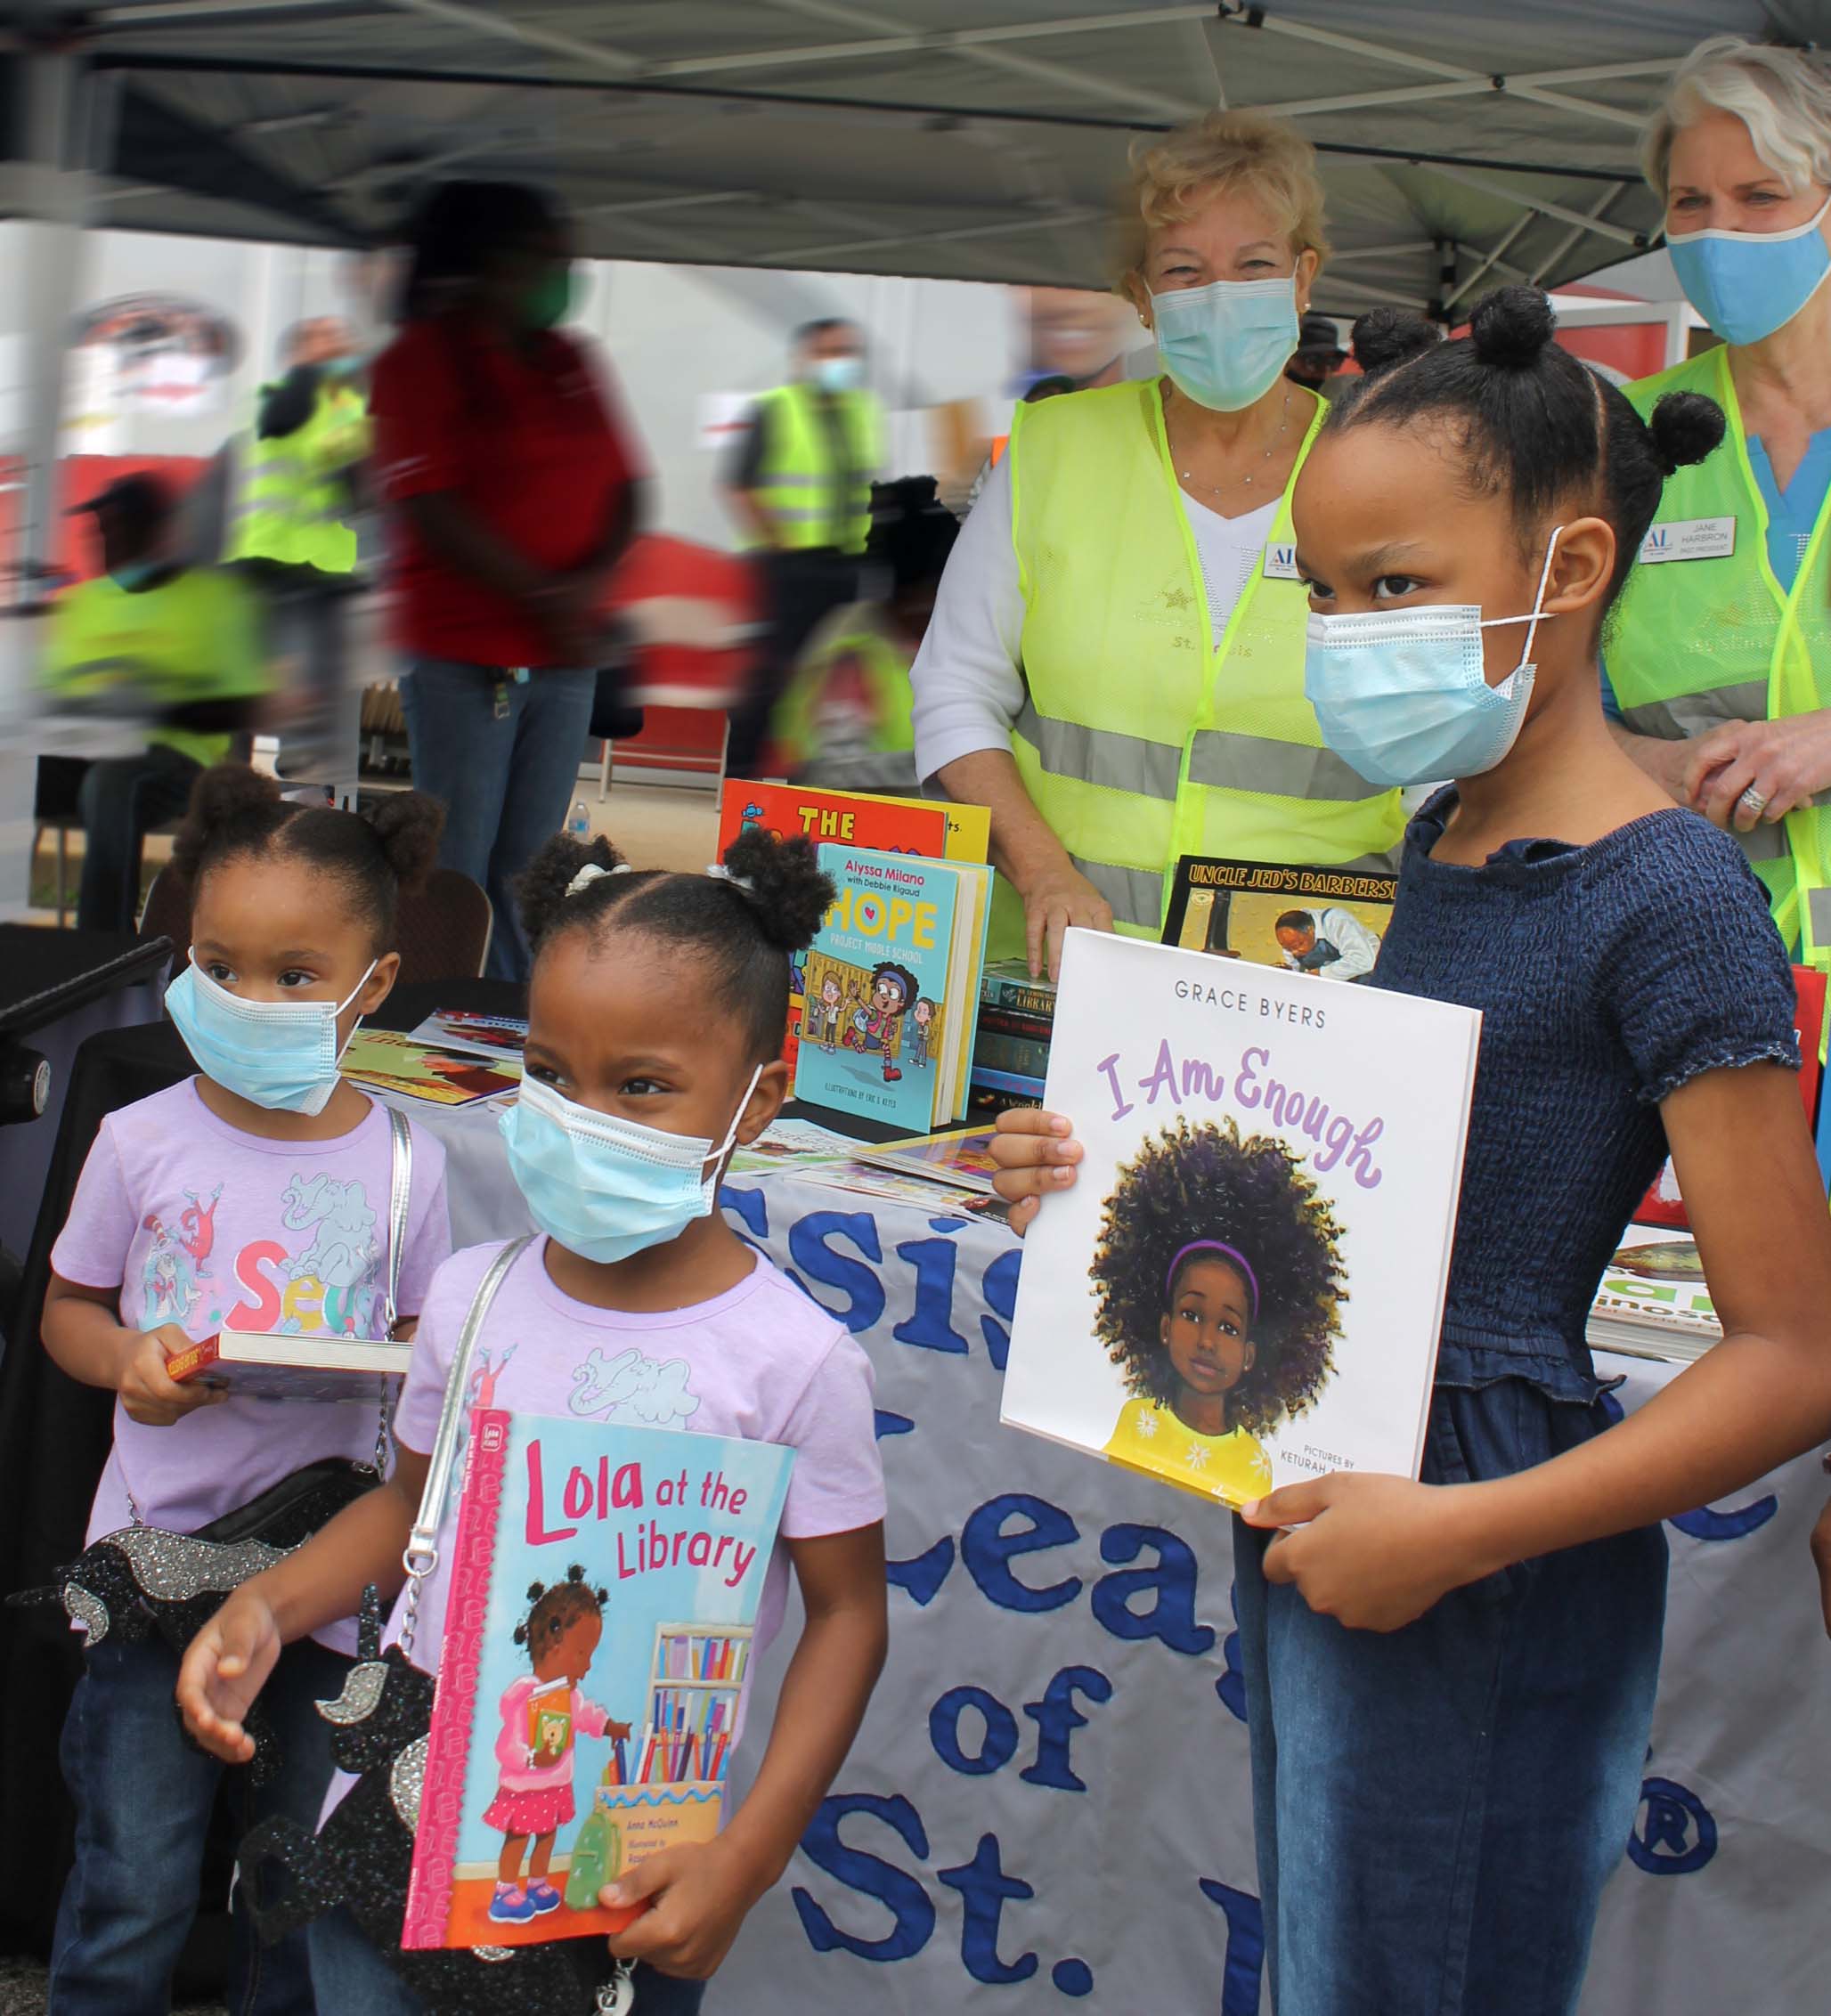 urban league august 1 2020 dawn thomas and jane Harbron with children and books cropped